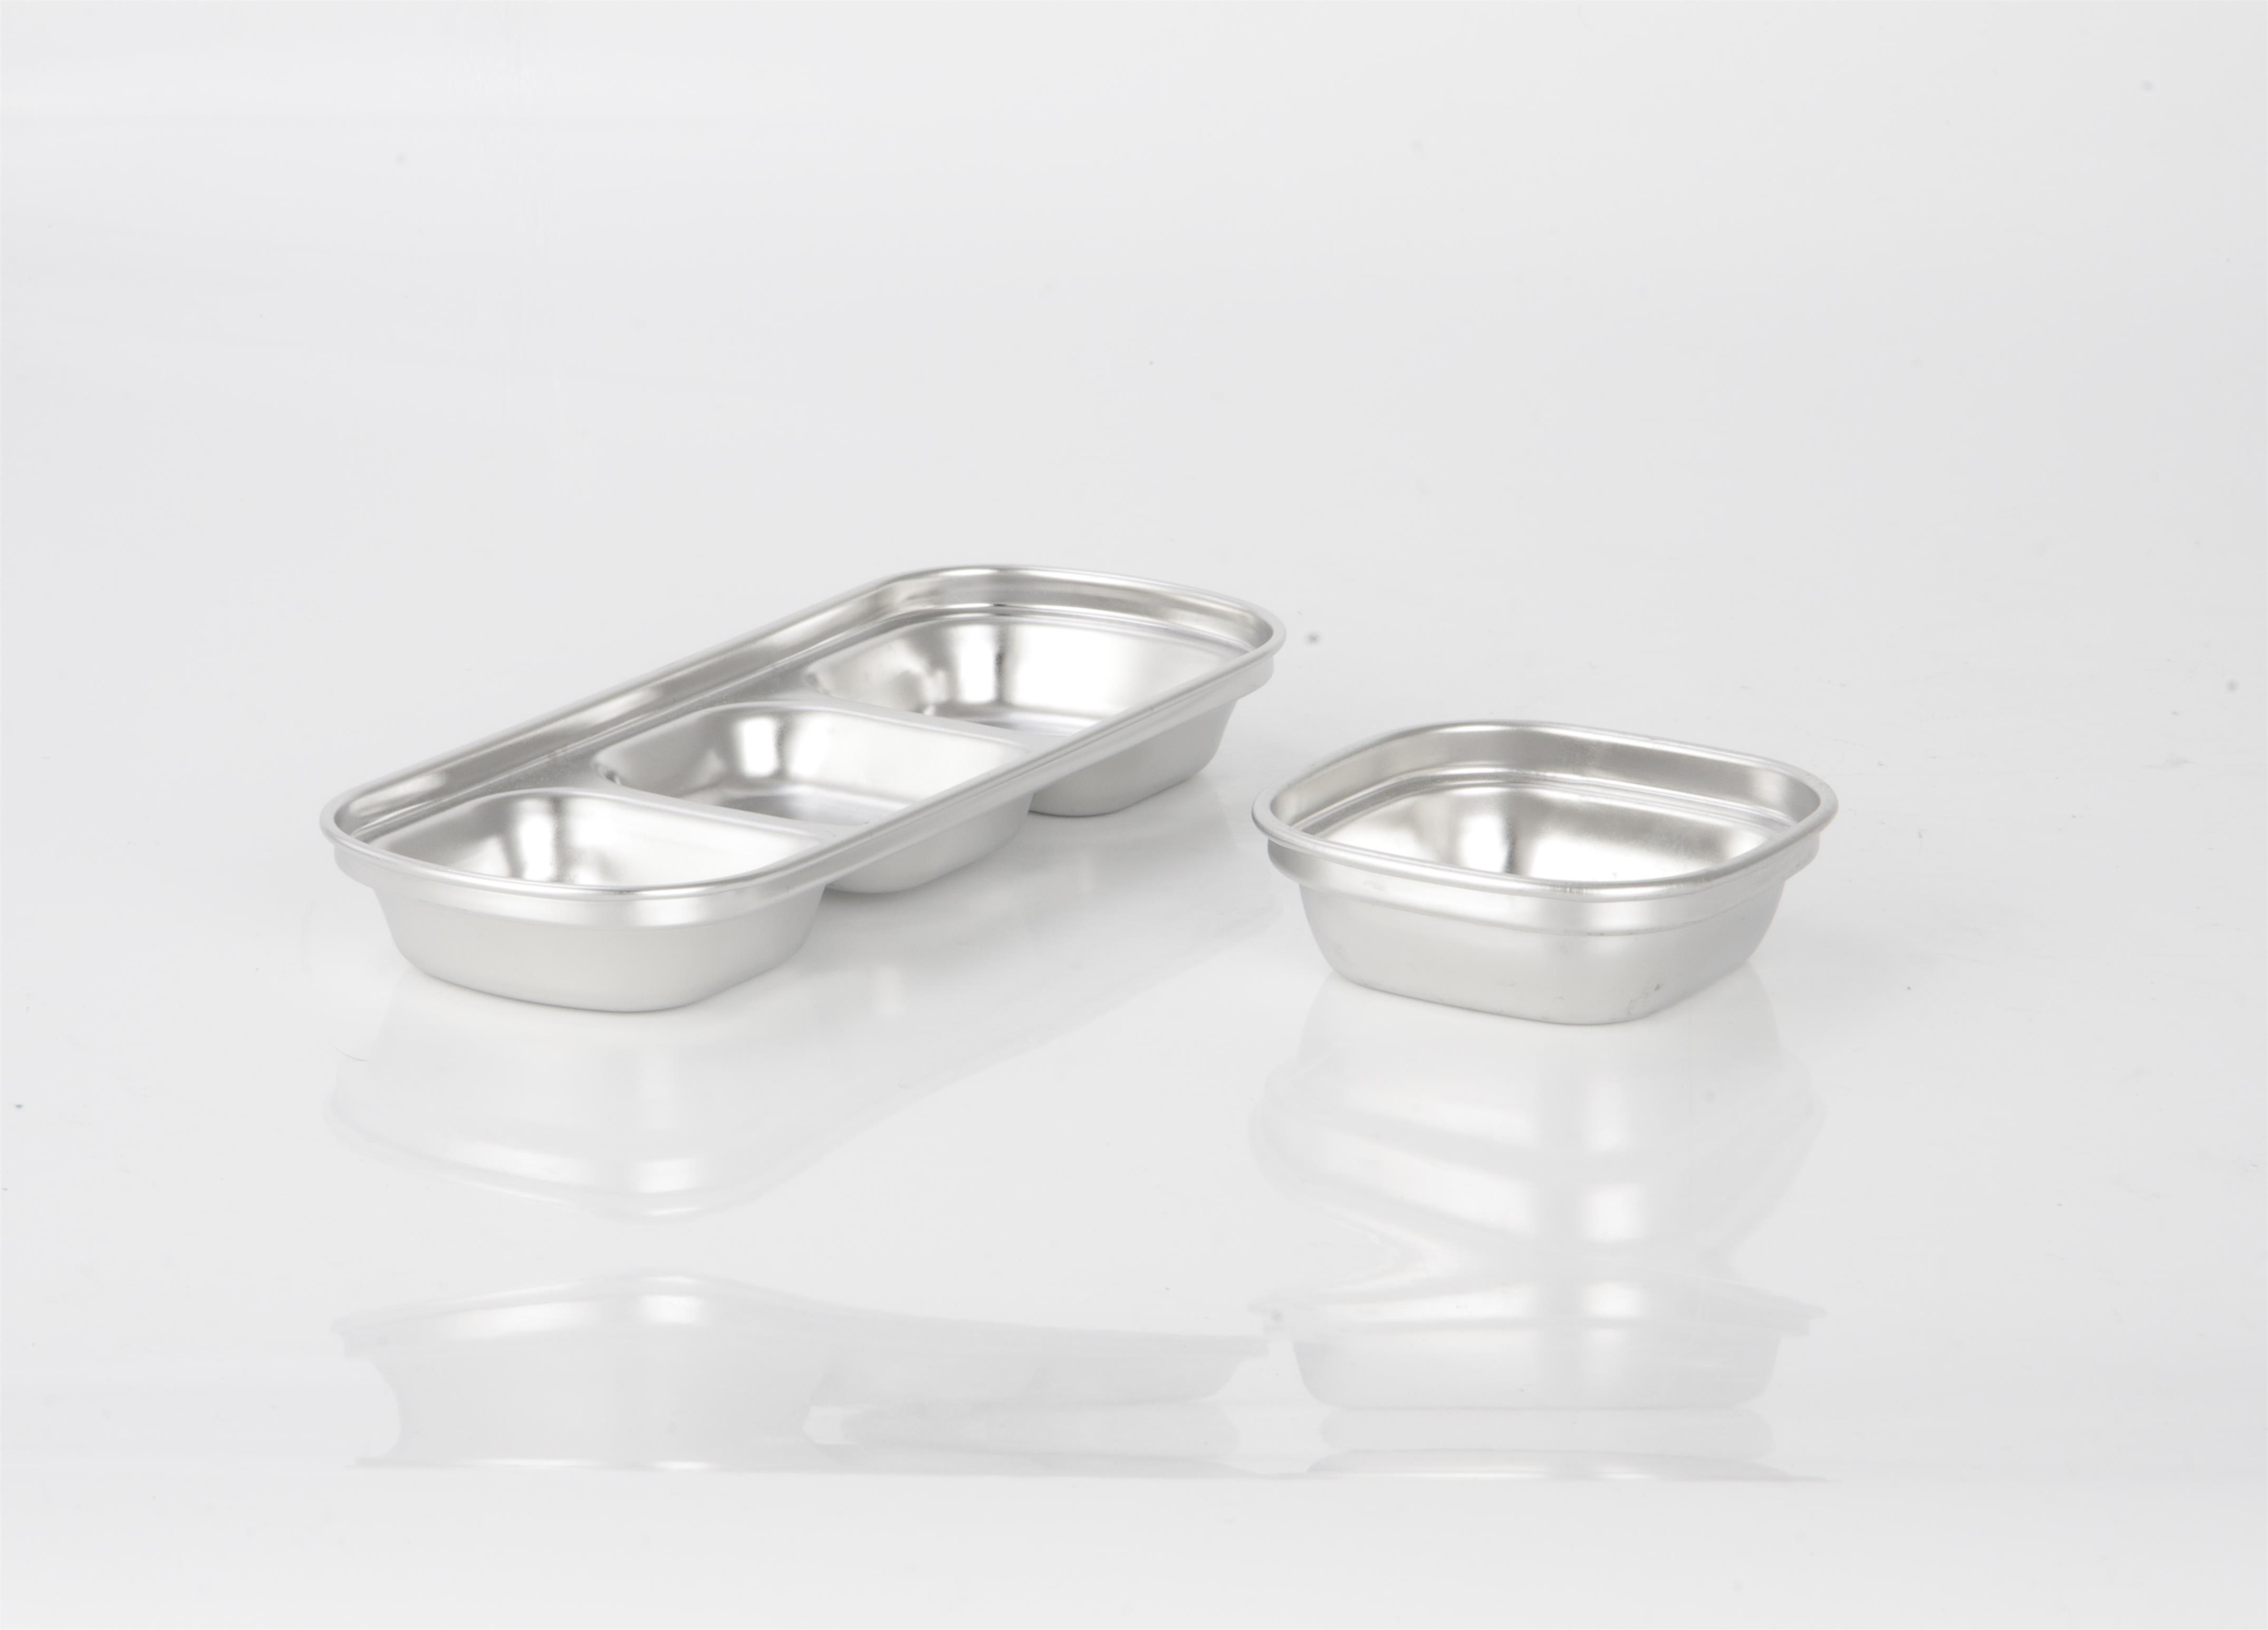 Evergreen New stainless steel eating plates Supply for cooking